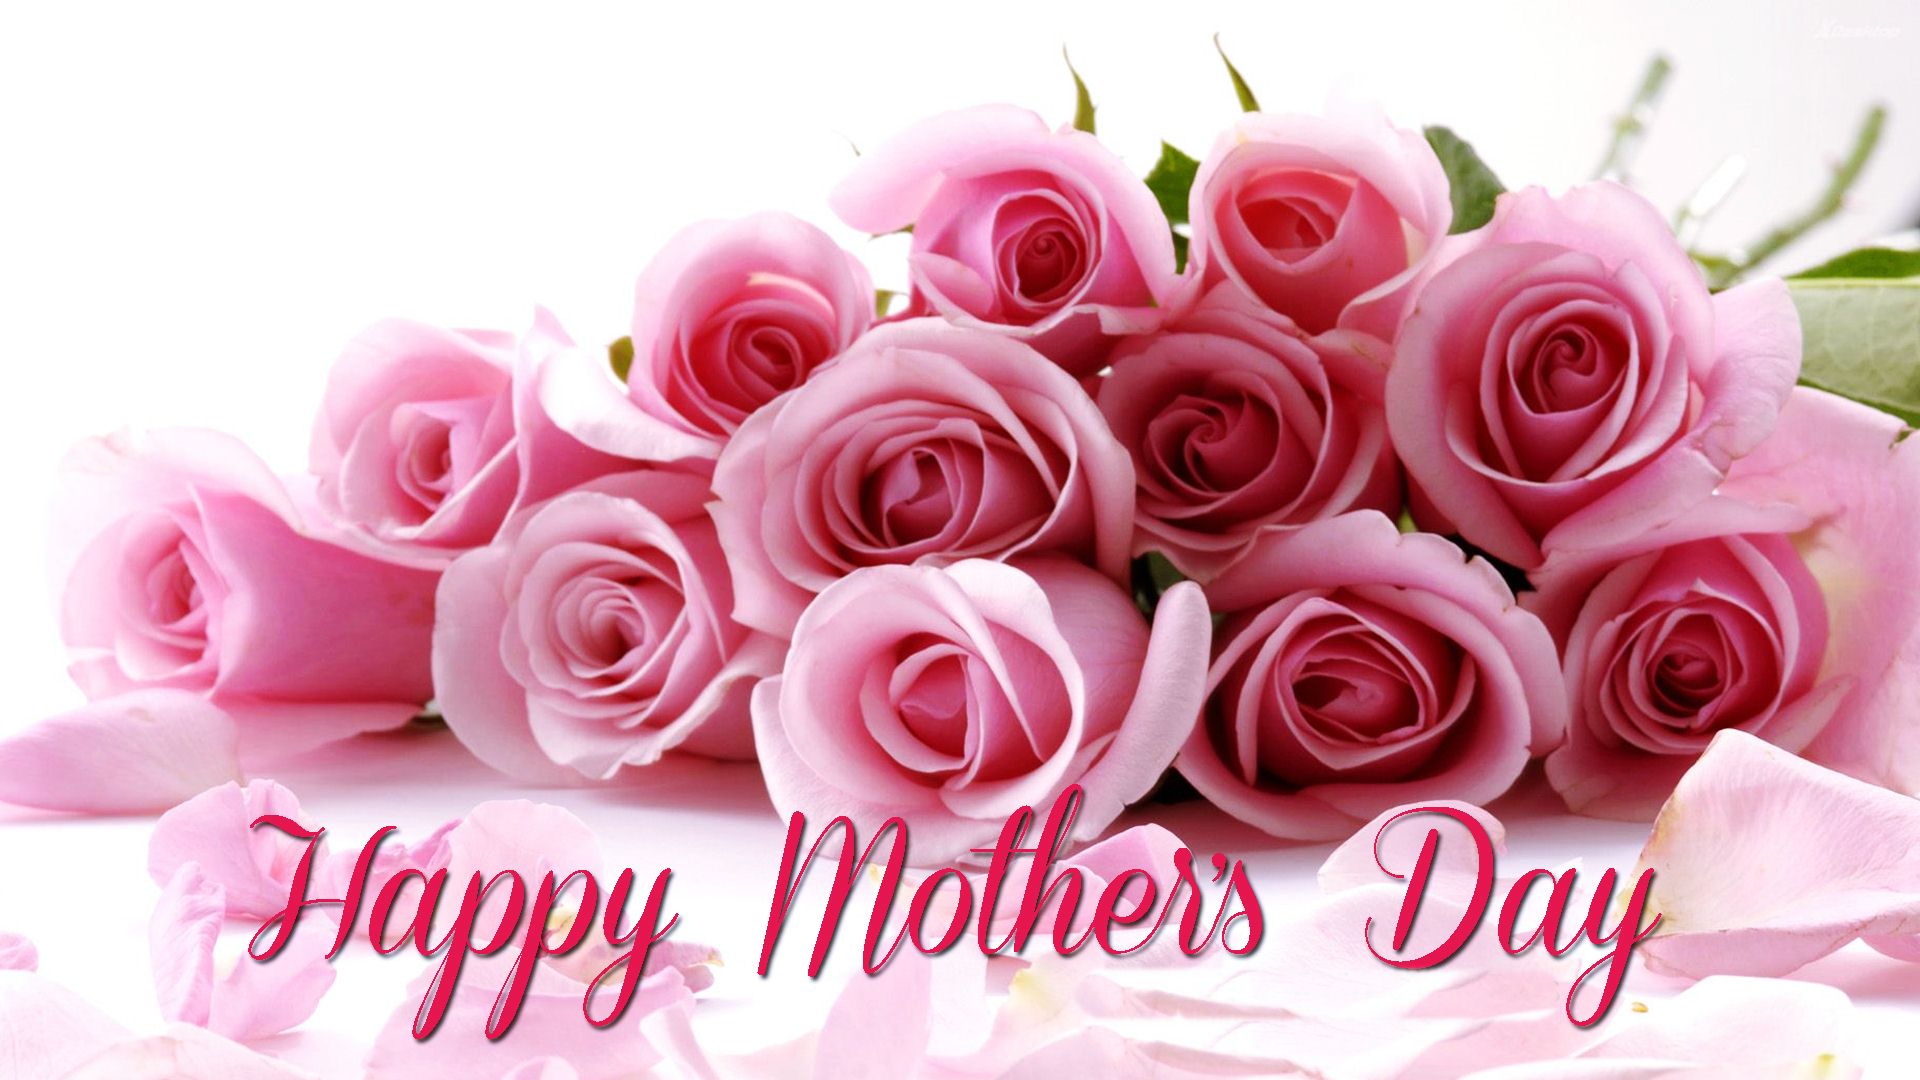 mother's day, holiday, flower, pink rose, rose